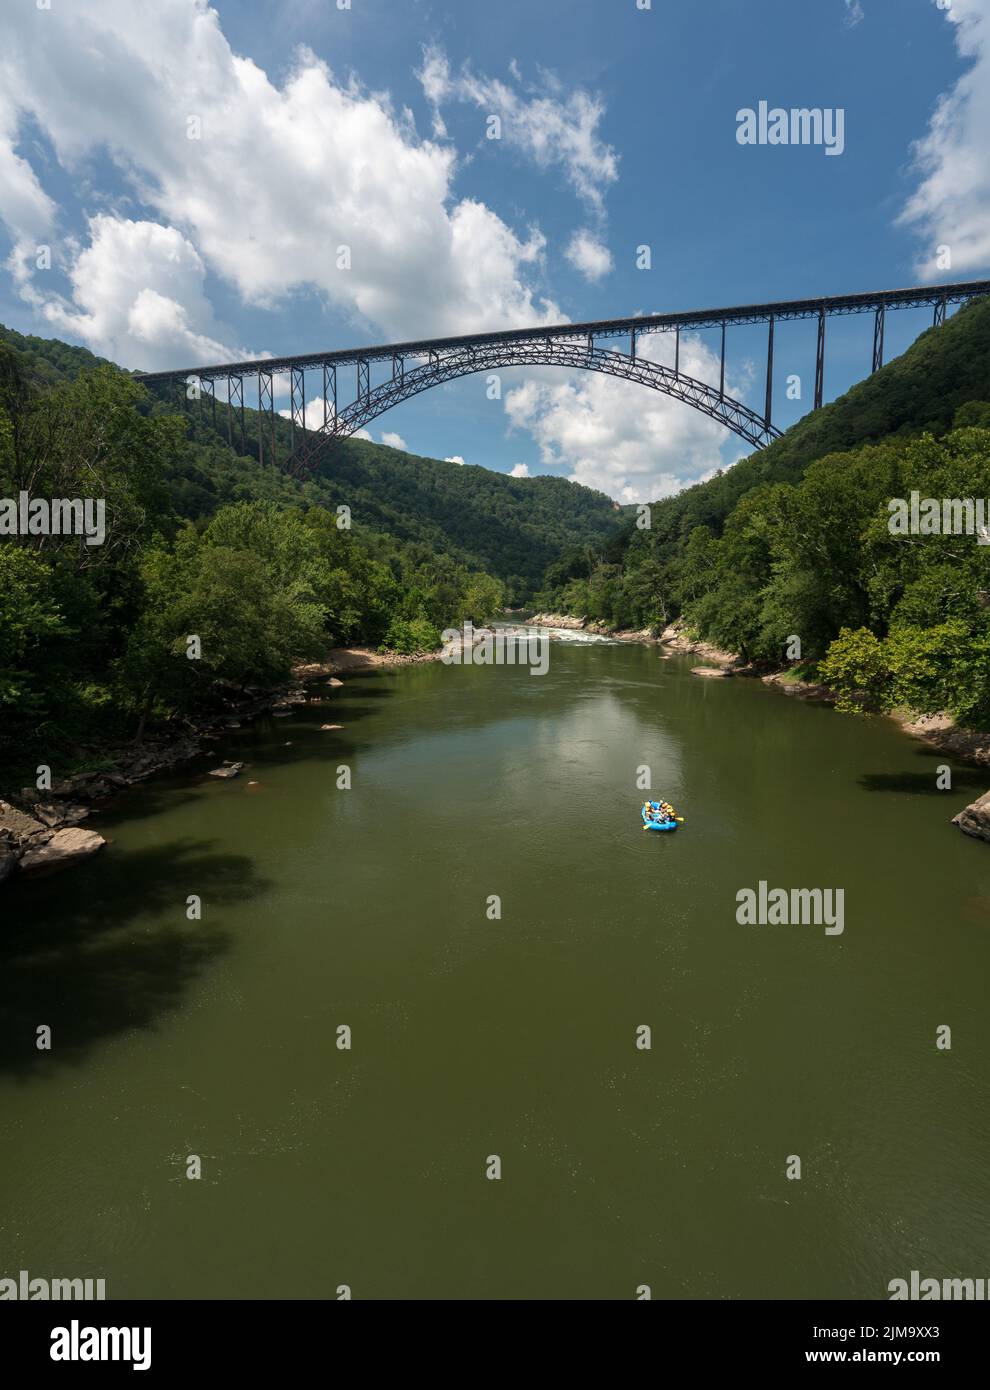 Rafters at the New River Gorge Bridge in West Virginia Stock Photo